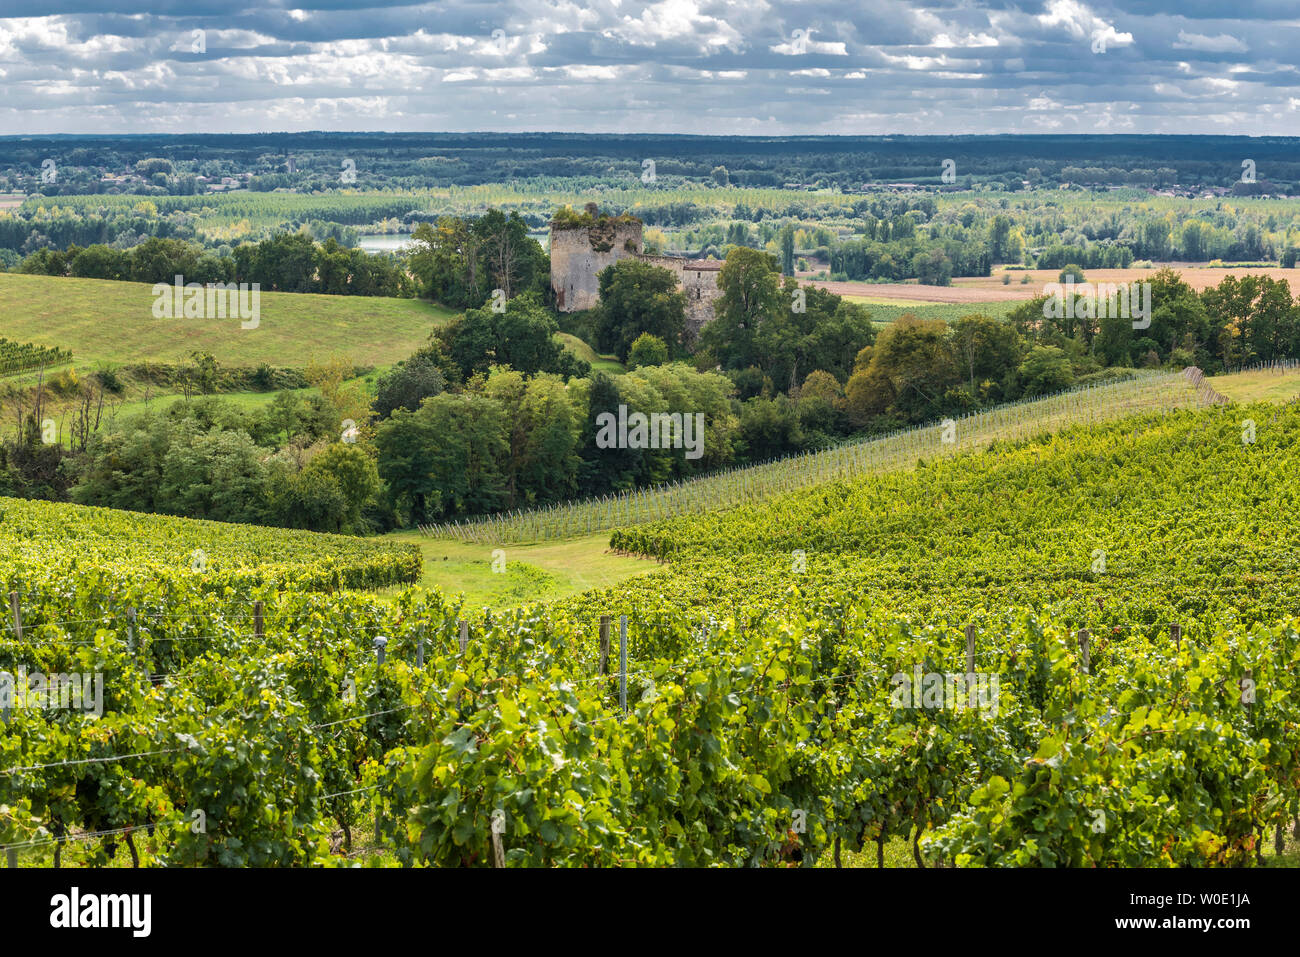 France, Gironde, Entre-deux-Mers, vallée de la Garonne with the feudal castle of Langoiran in the middle of the vineyards Stock Photo